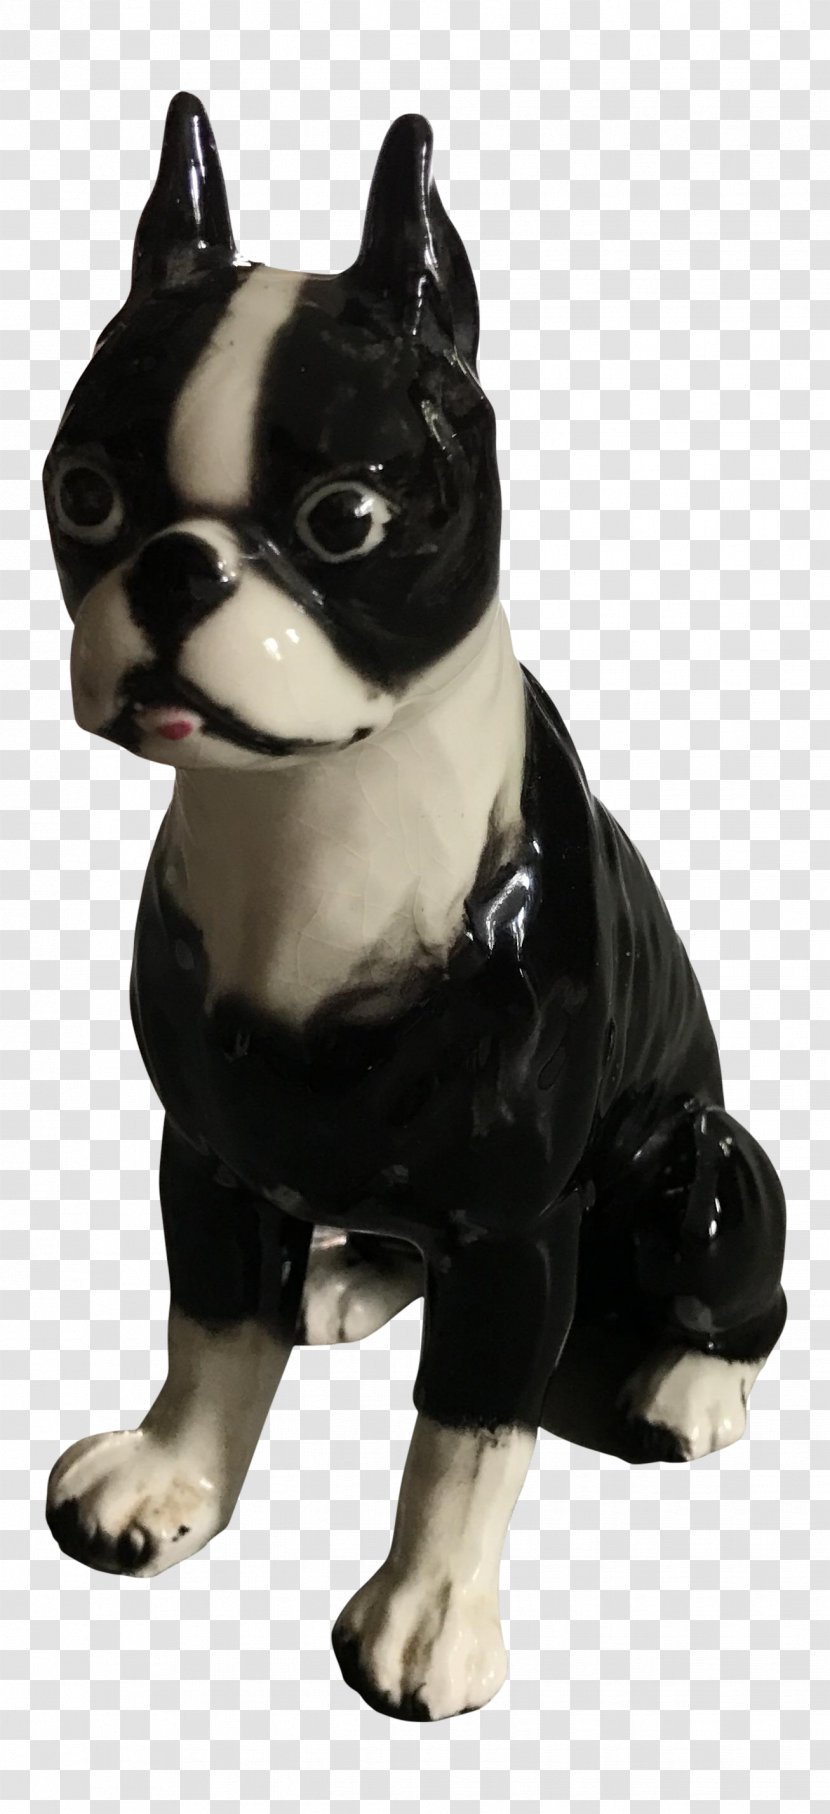 Boston Terrier Dog Breed Companion Non-sporting Group - Black French Bulldog Transparent PNG